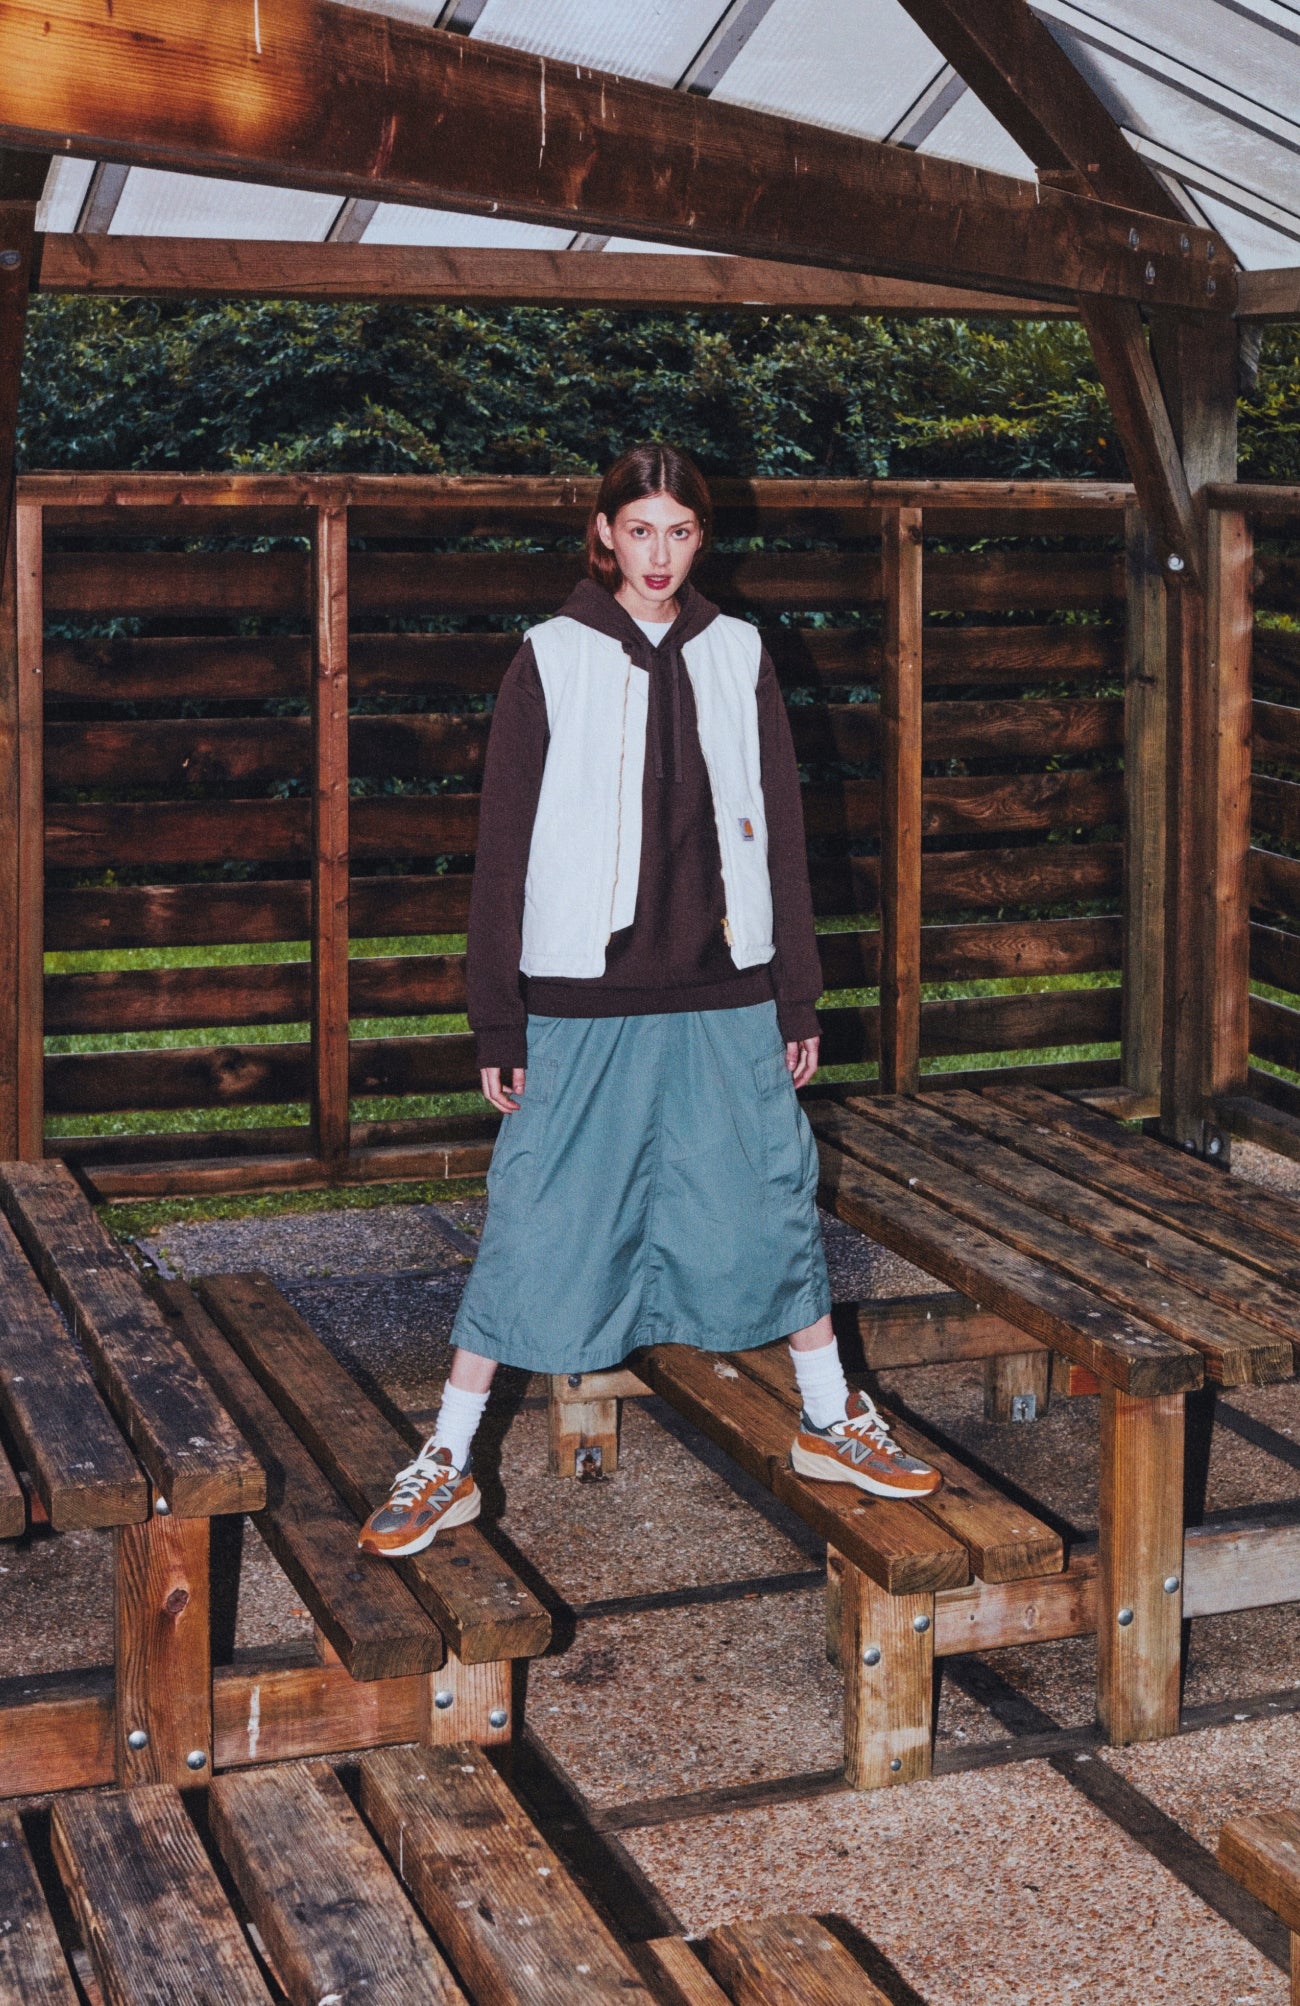 Model standing upon two bench seats wearing Carhartt Vest in Wax, Hoodie in Tamarind, Cargo Skirt in Smoke Green, and 990v6 Carhartt WIP x New Balance Collaboration